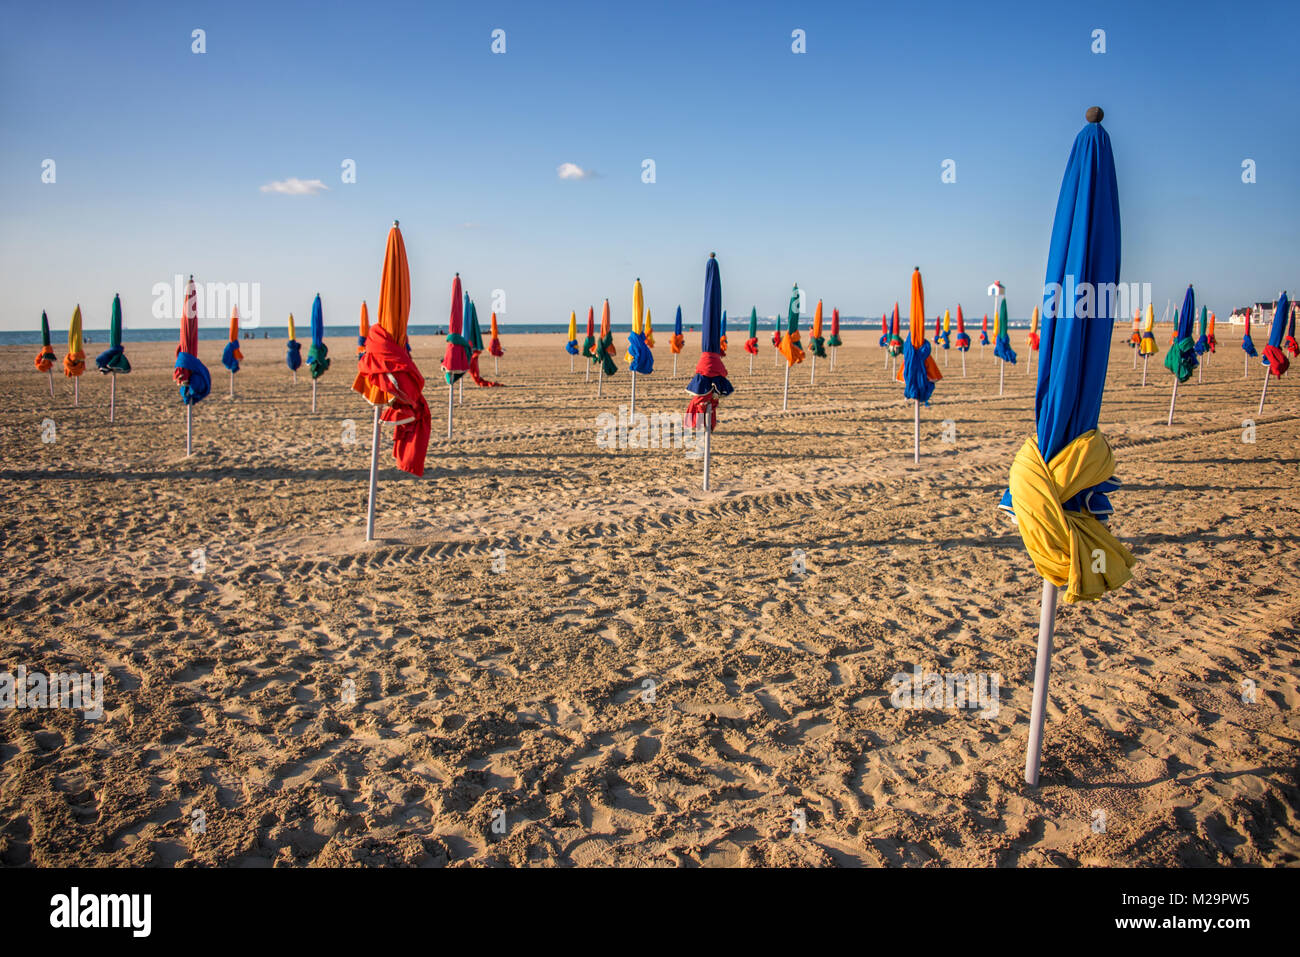 Colorful parasols on Deauville beach, France Stock Photo